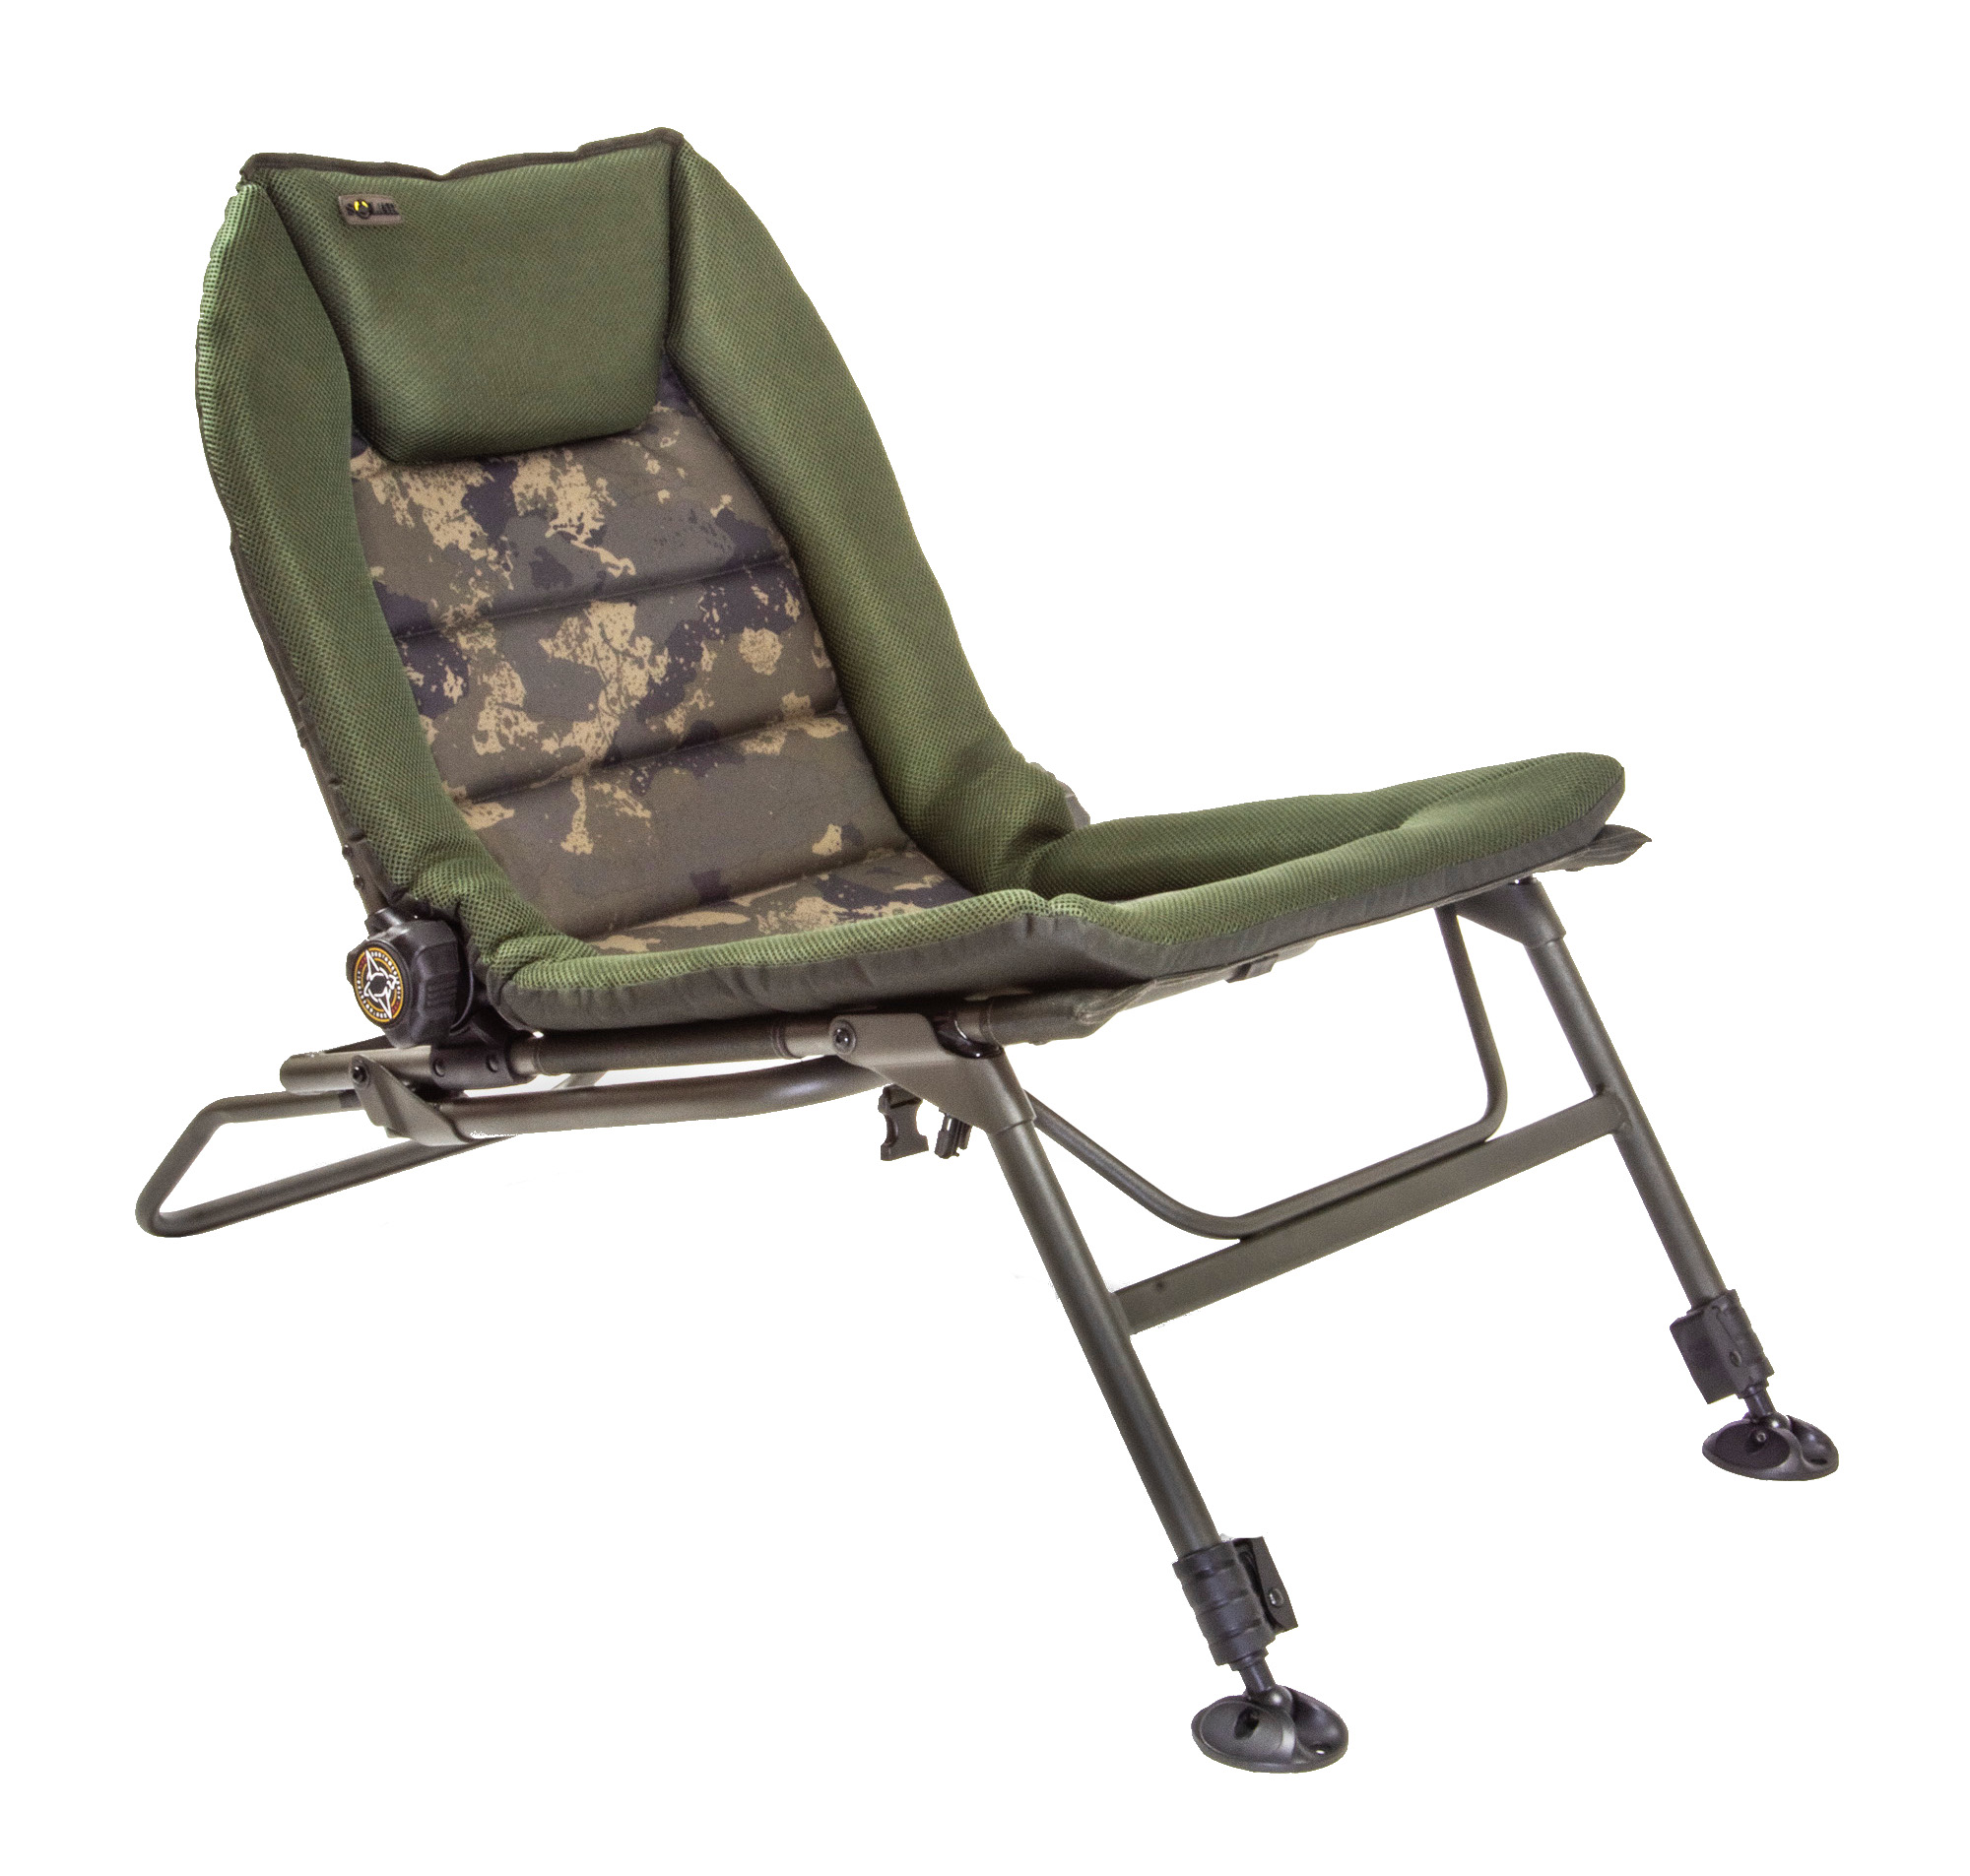 Solar South Westerly Pro Combi Chair Karperstoel (Bed-Fit & Recline)